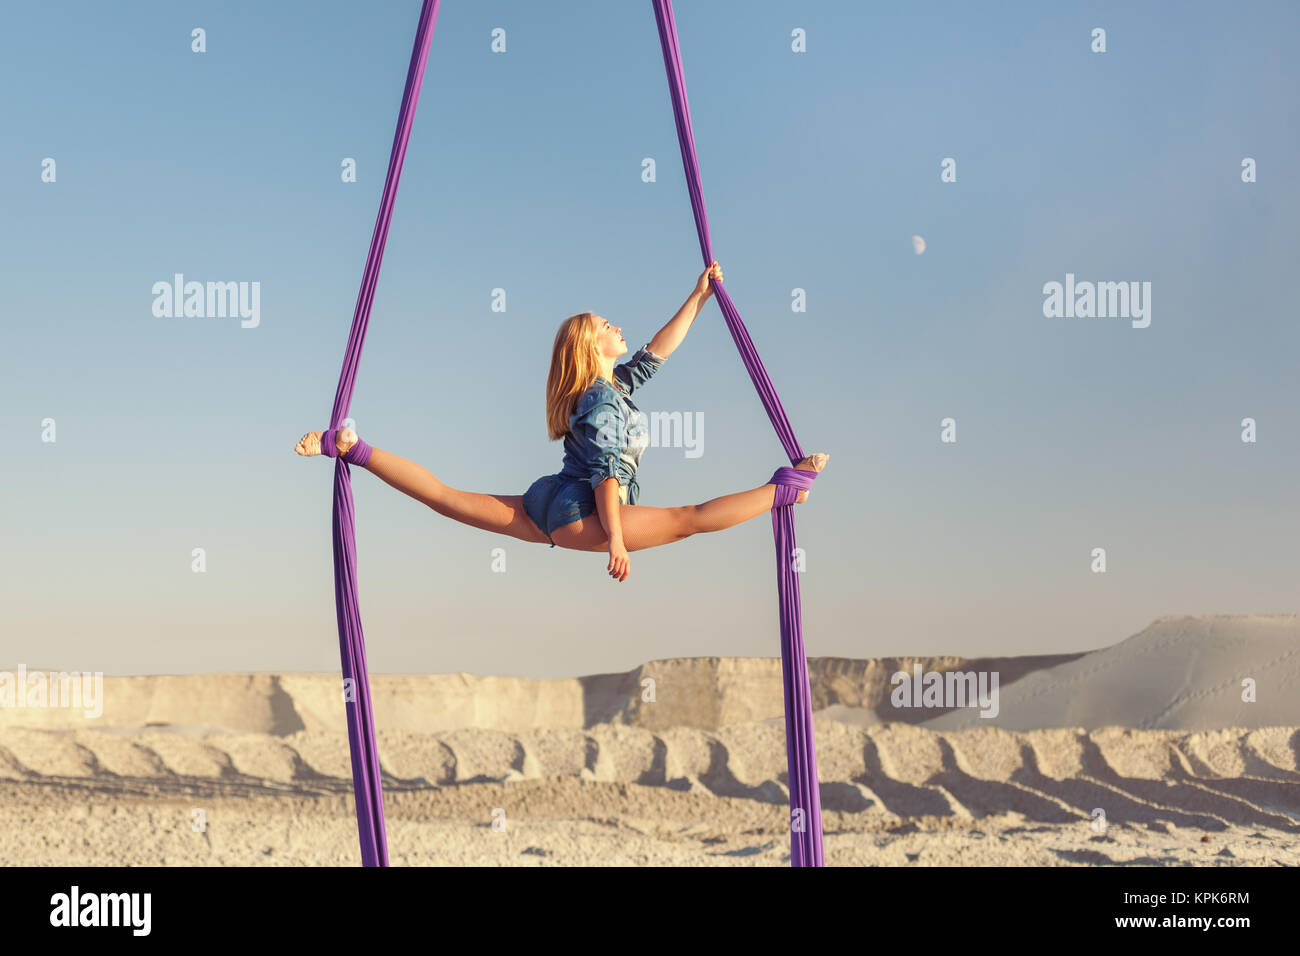 Woman is an air acrobat on canvases, in the desert high above the earth. Stock Photo